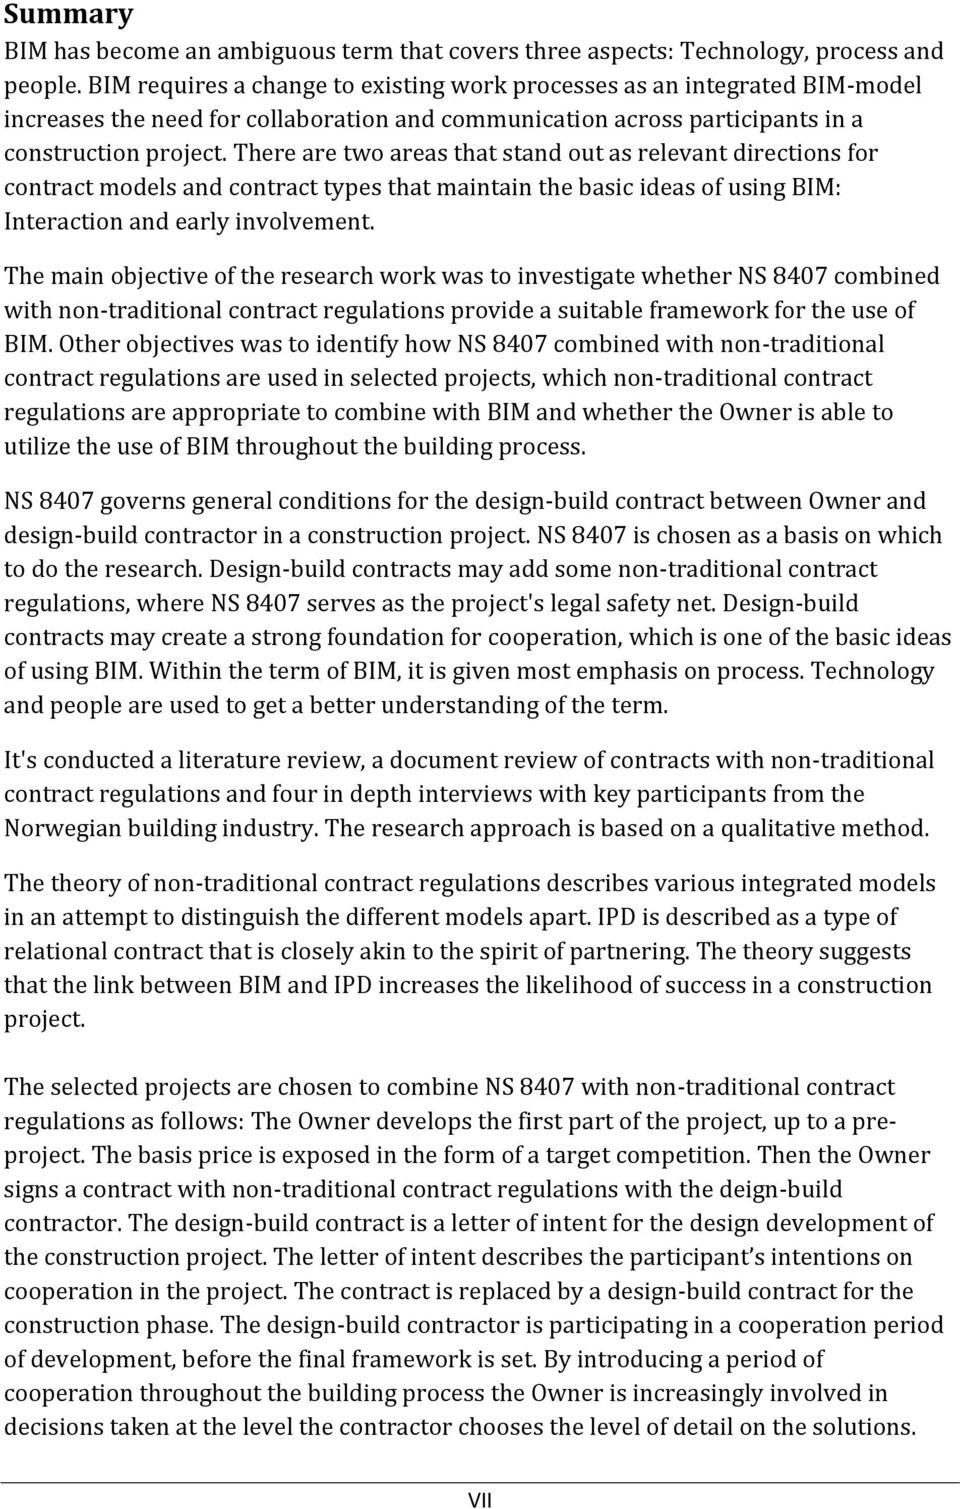 There are two areas that stand out as relevant directions for contract models and contract types that maintain the basic ideas of using BIM: Interaction and early involvement.